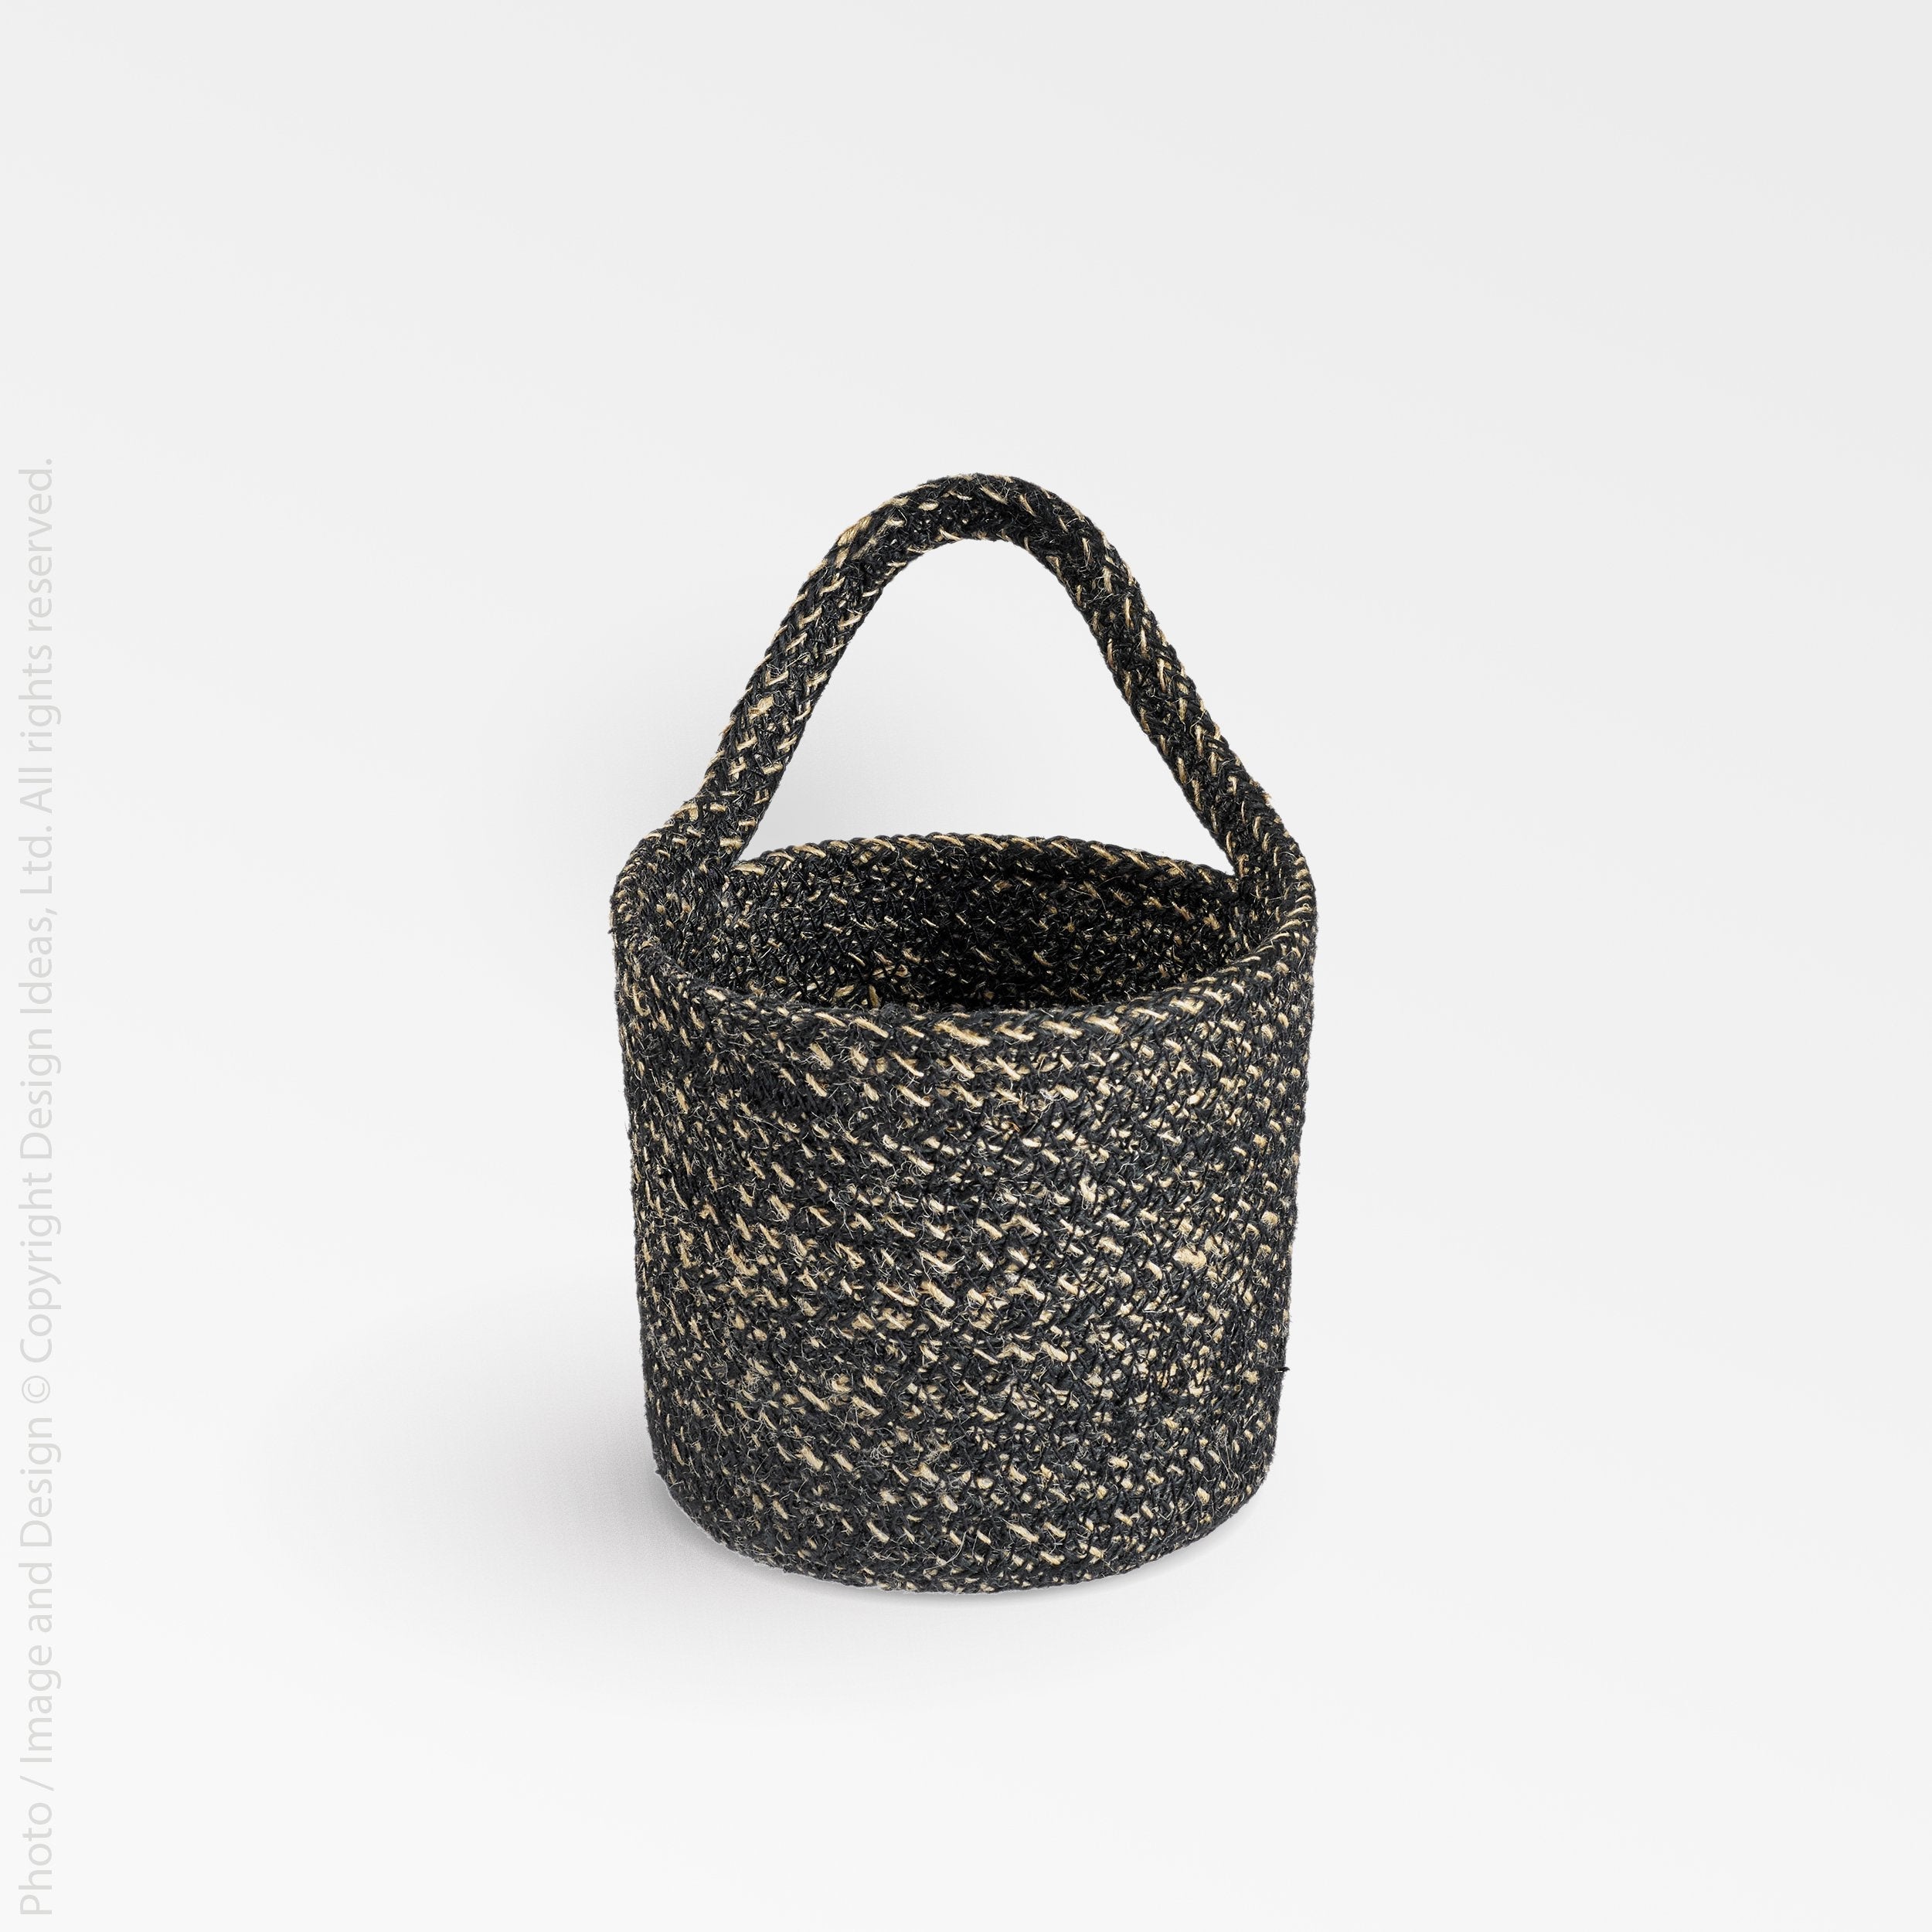 Melia™ hanging basket (4.6 x 5.2 x 4.8 in.) - Black | Image 5 | Premium Basket from the Melia collection | made with Jute for long lasting use | texxture